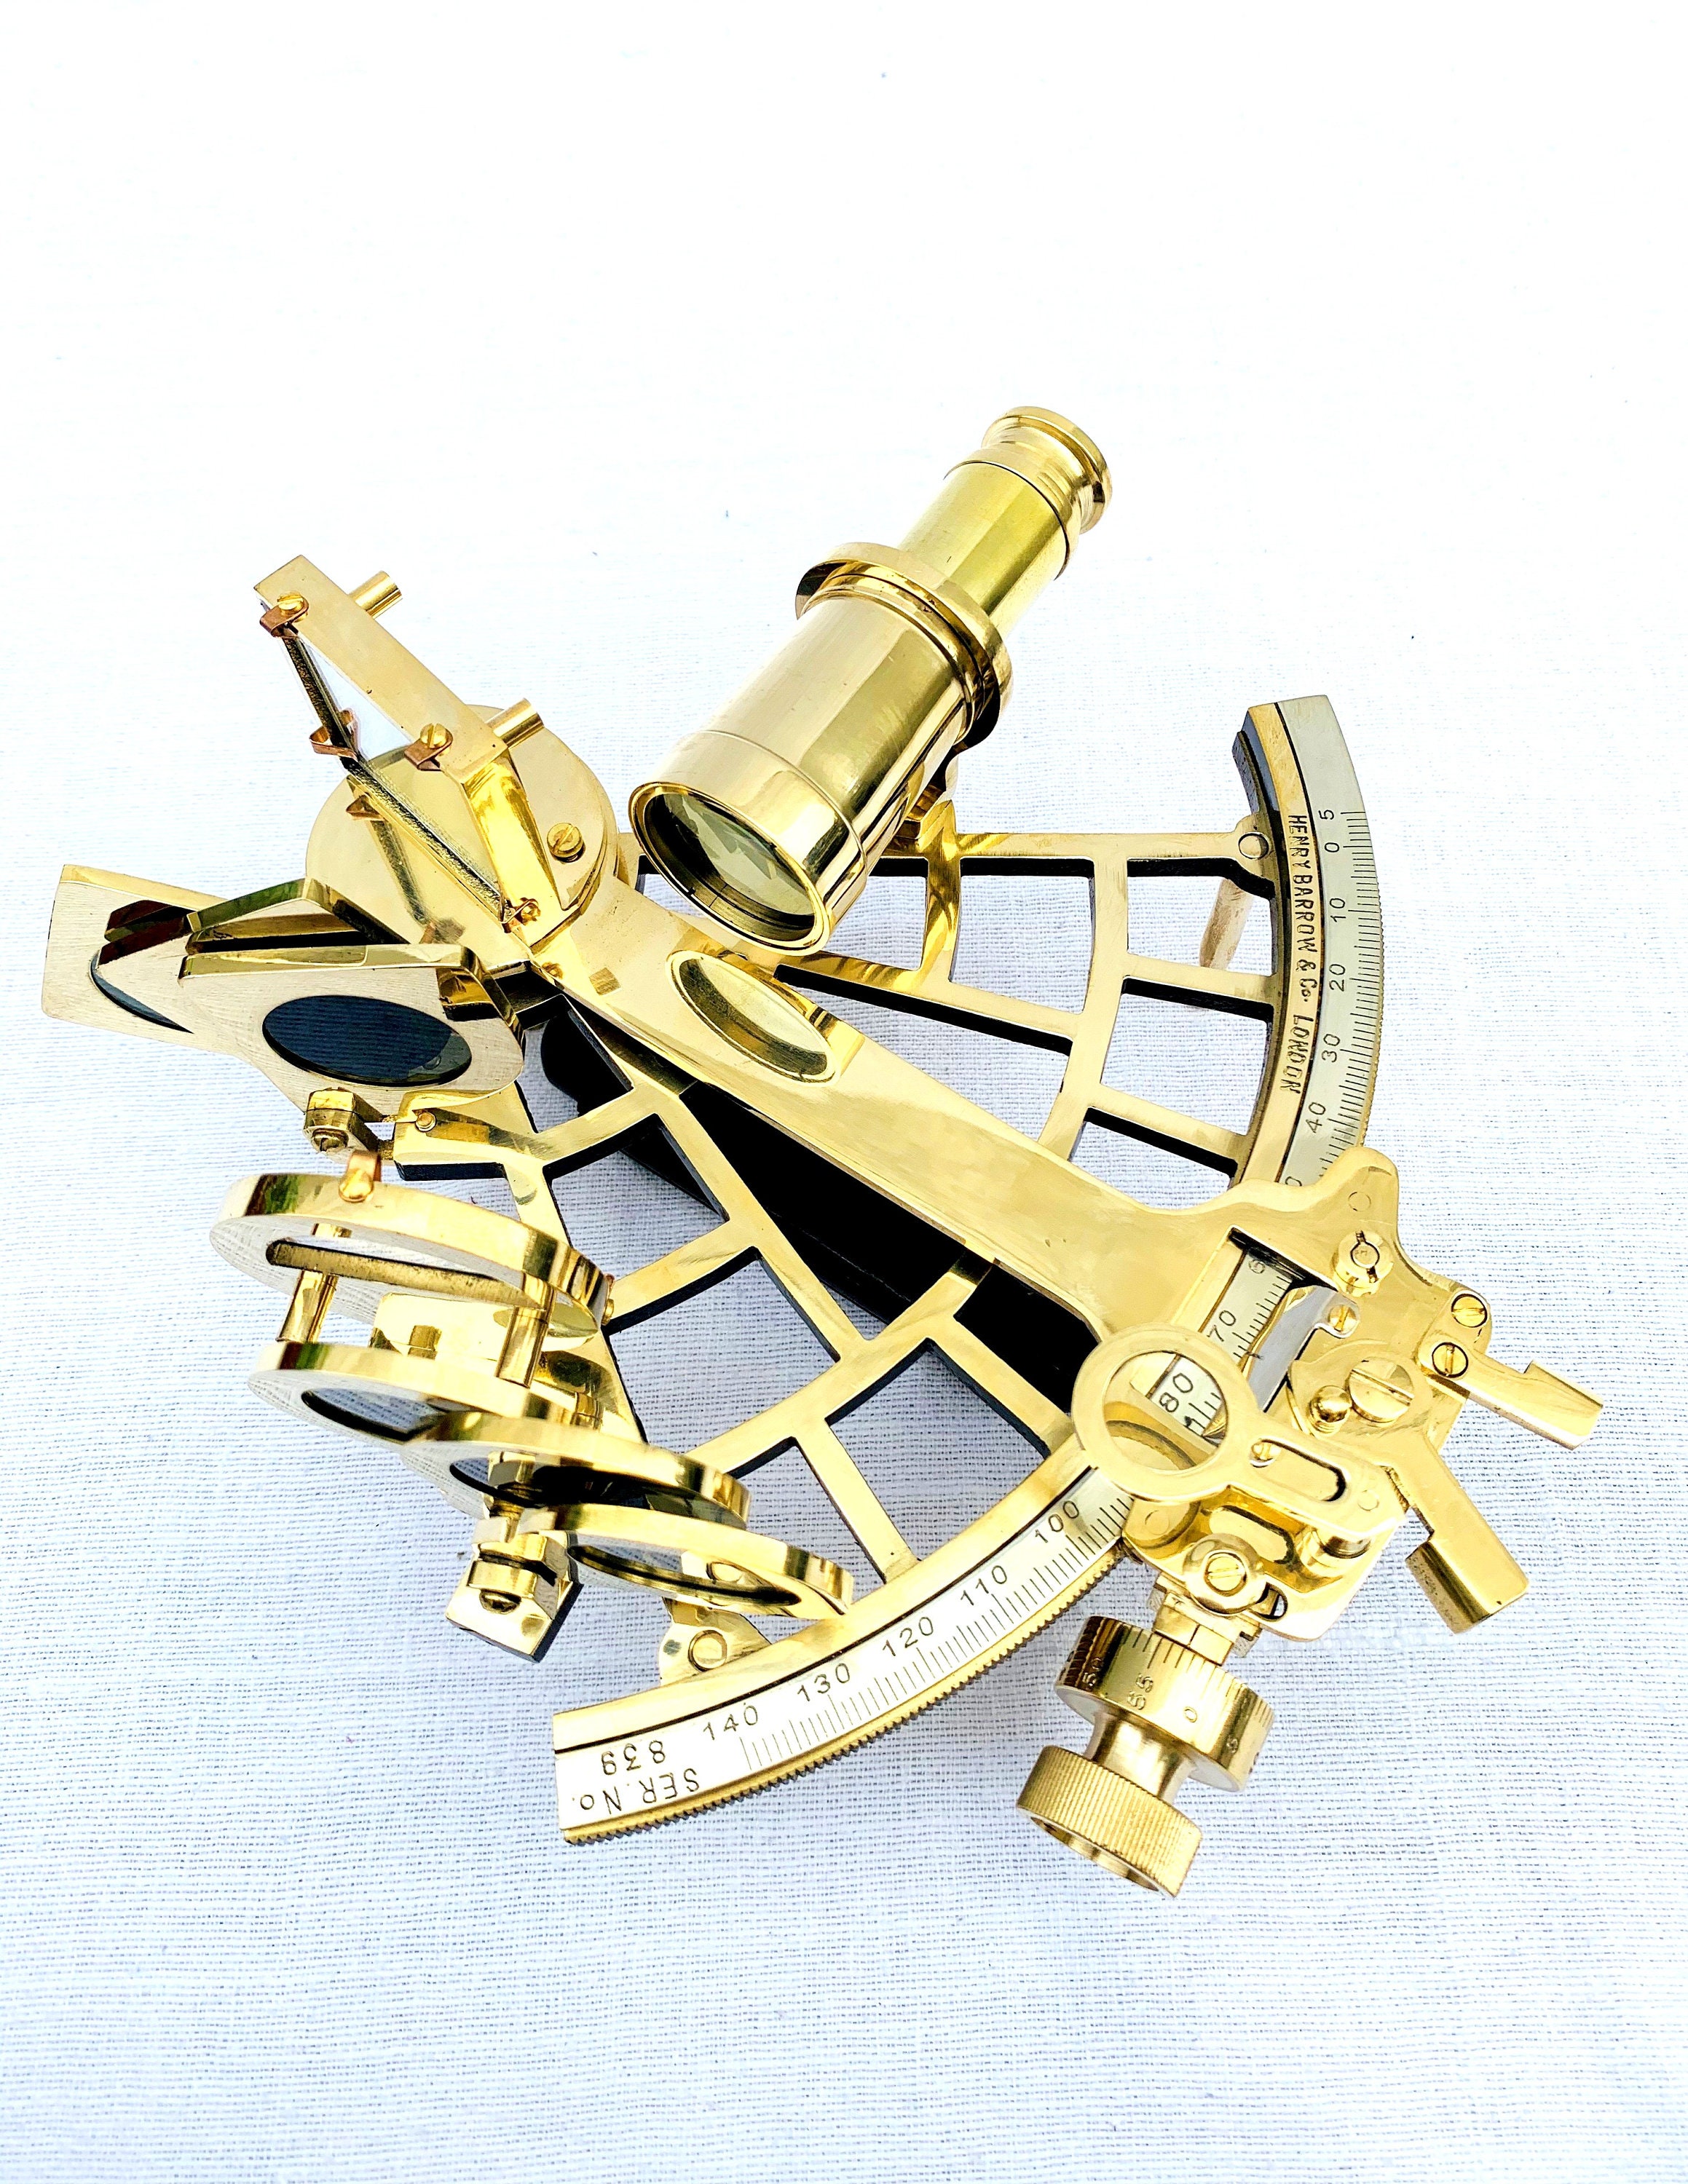 Solid Brass Working Sextant Handmade Nautical Astrolabe Desk Navigation Sextant 